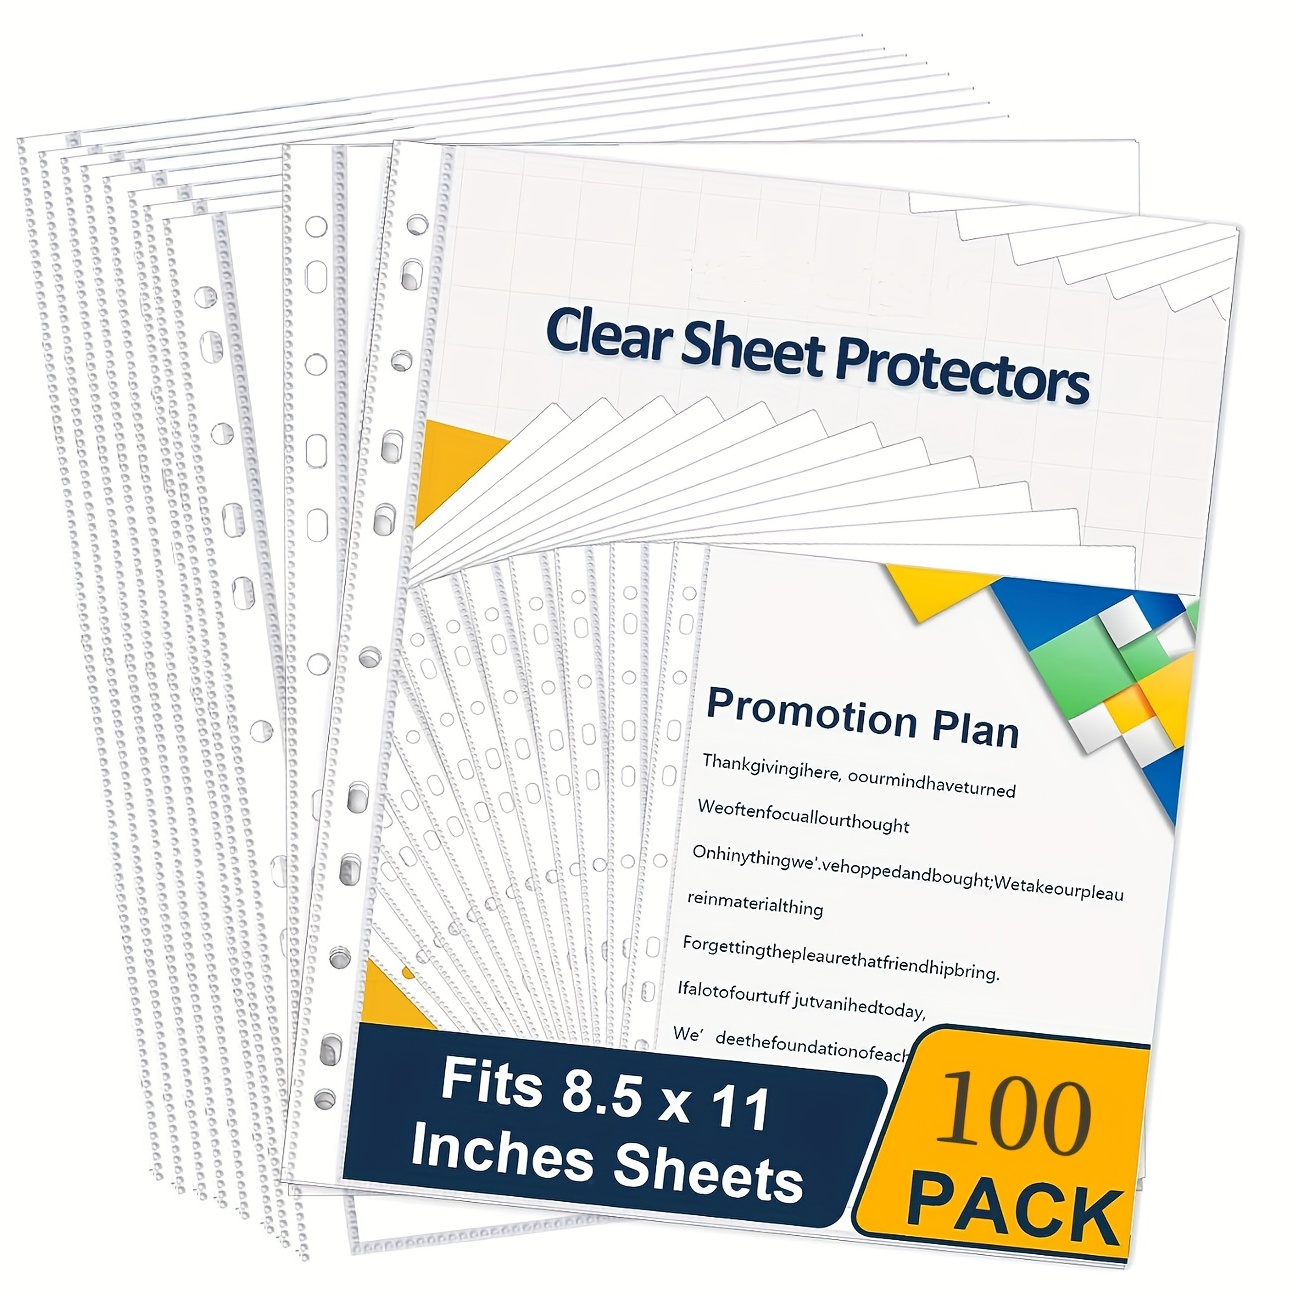 TYH Supplies 1000 Pack Clear Sheet Protectors for 3 Ring Binder | 8.5 x 11  Inch | Glossy Standard 11 Hole Plastic Page Protectors for Home, Office